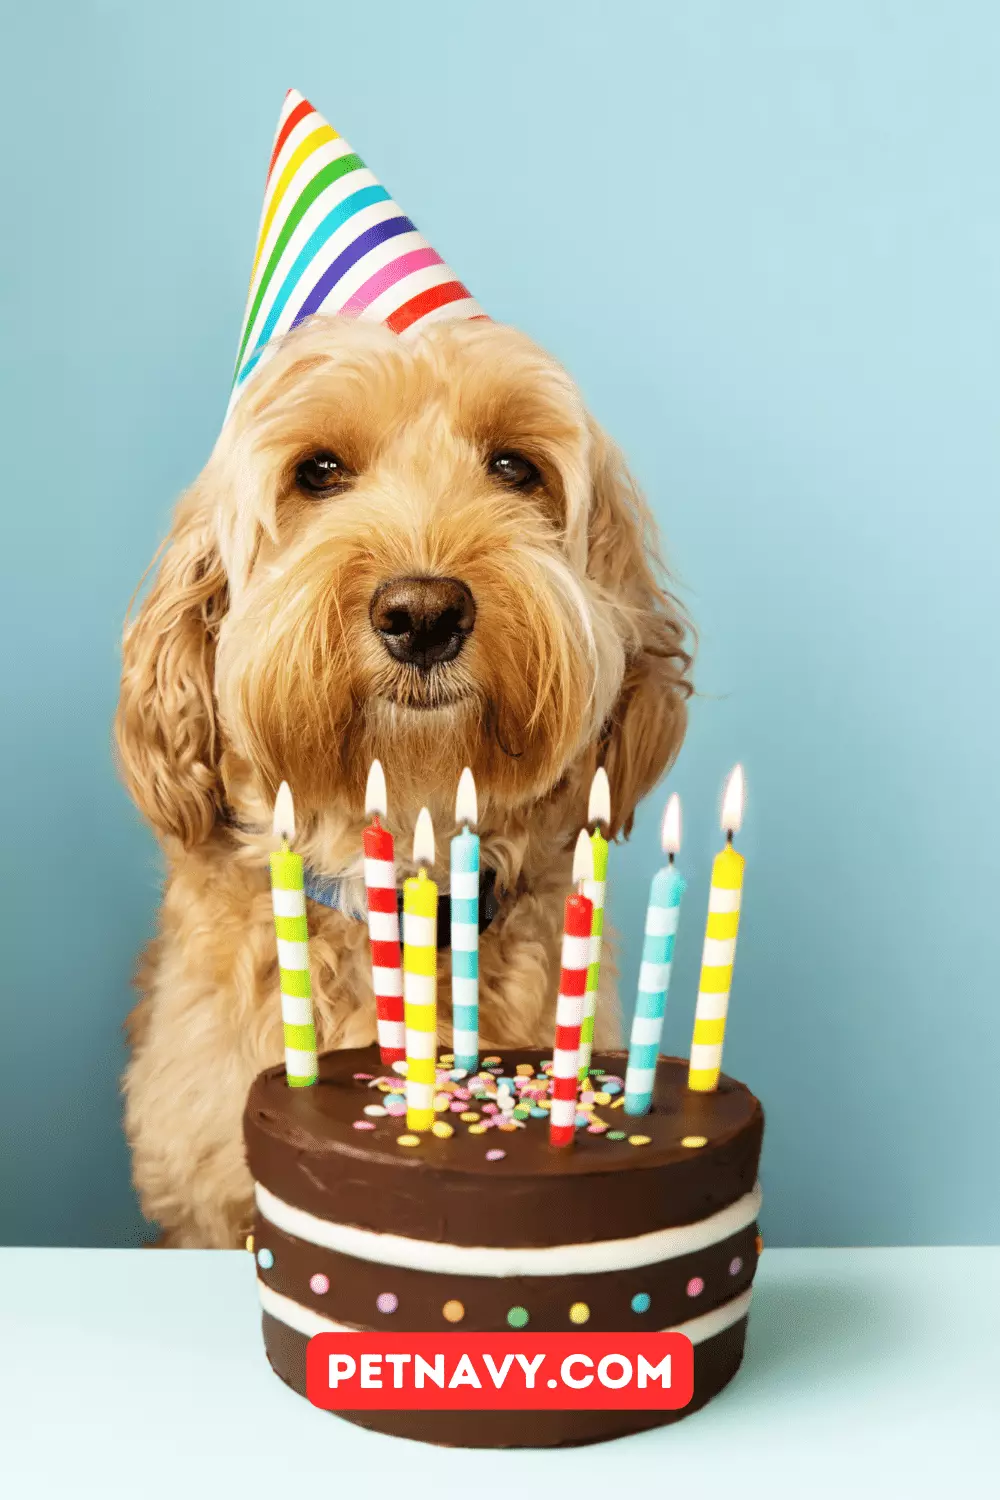 Dog Birthday Party: 10 Tips for a Memorable Day